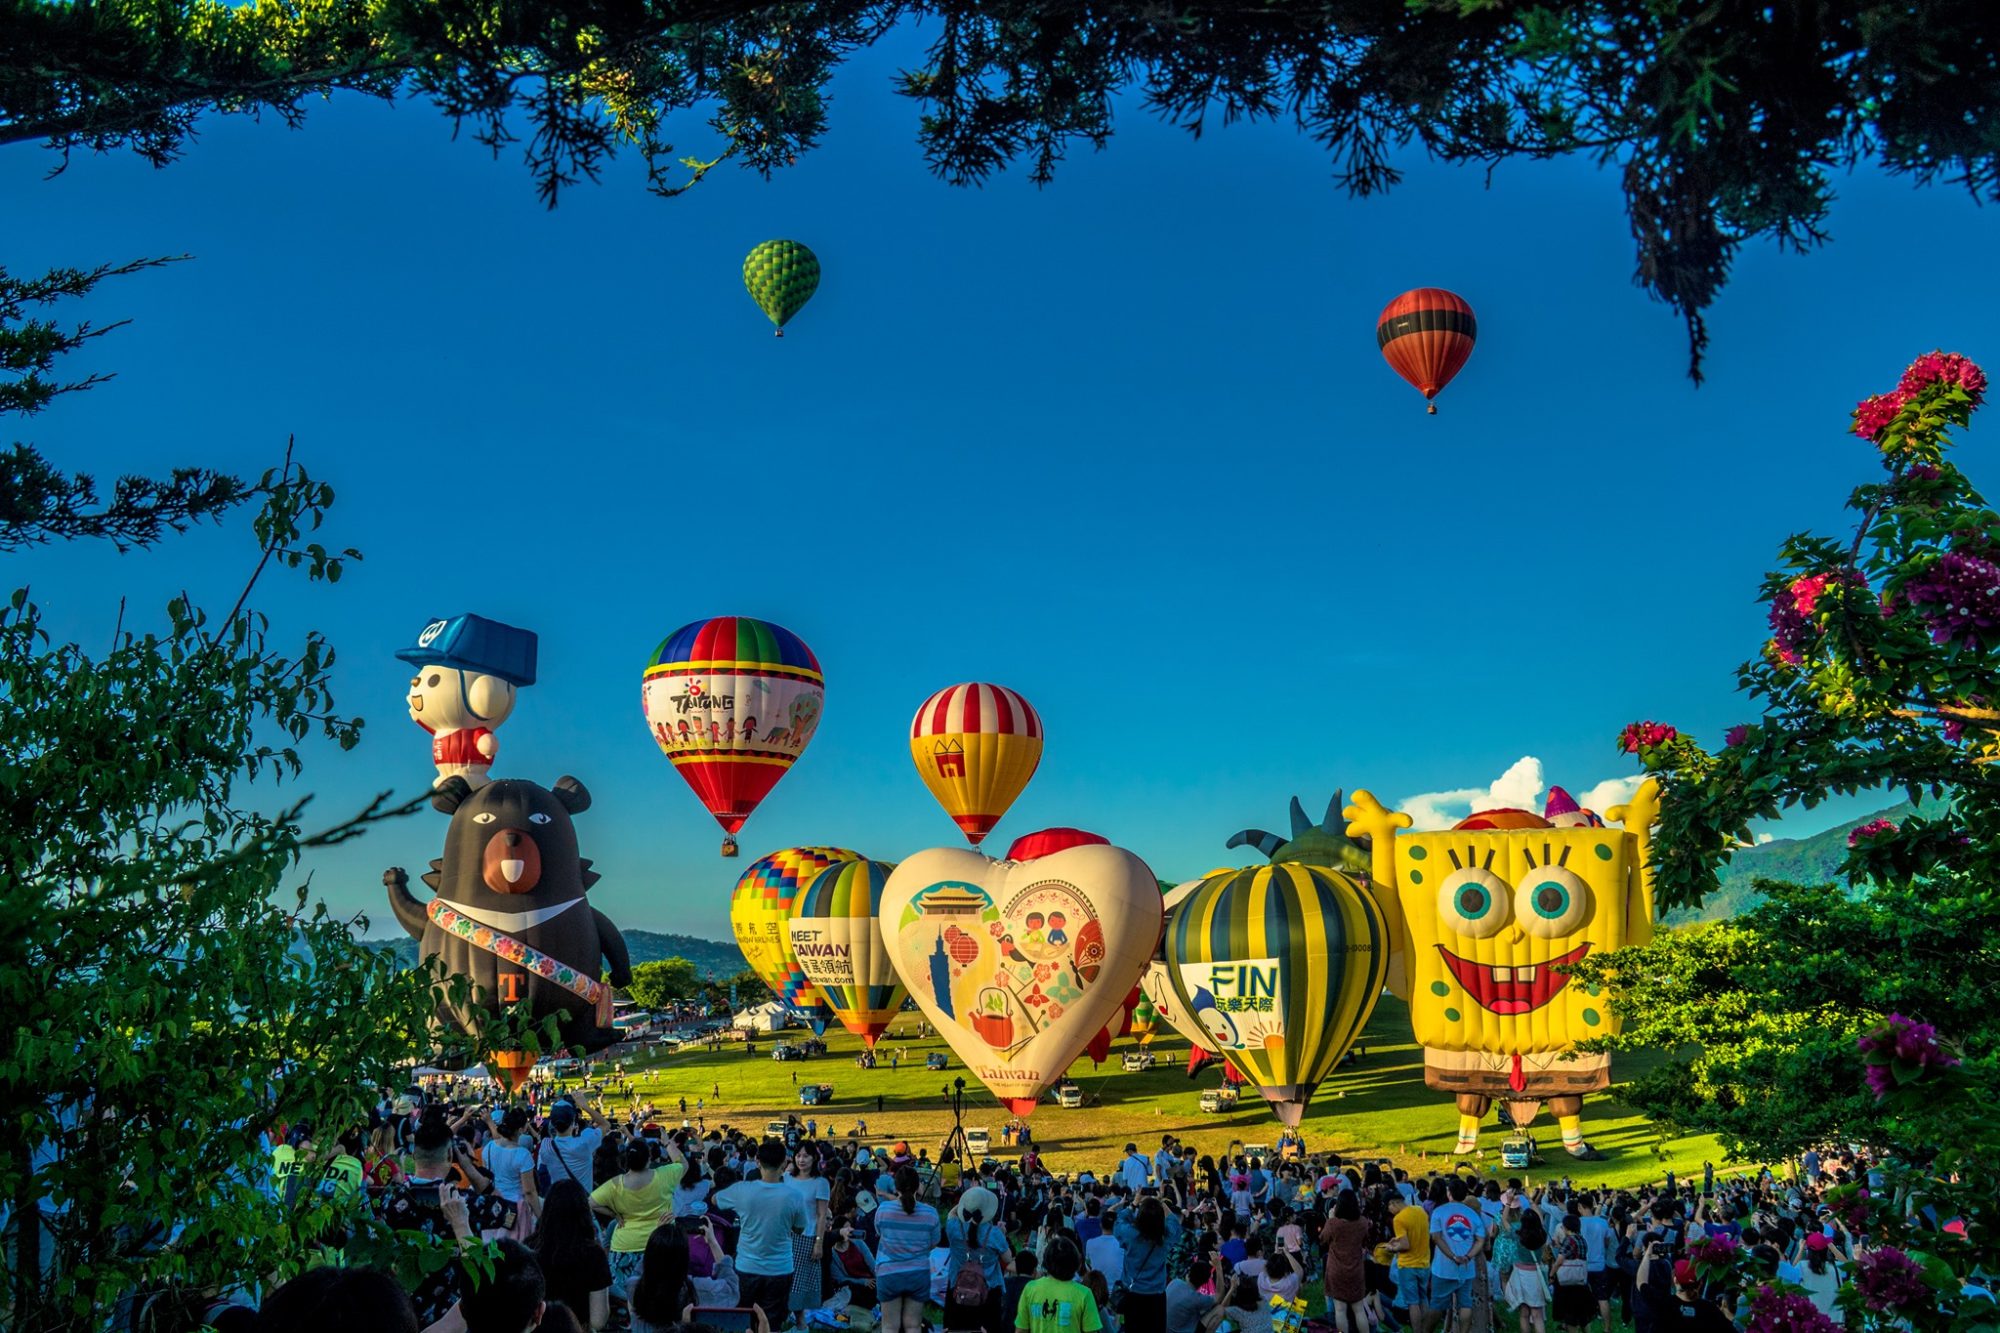 Debuting the world’s only balloon festival this year in Taiwan